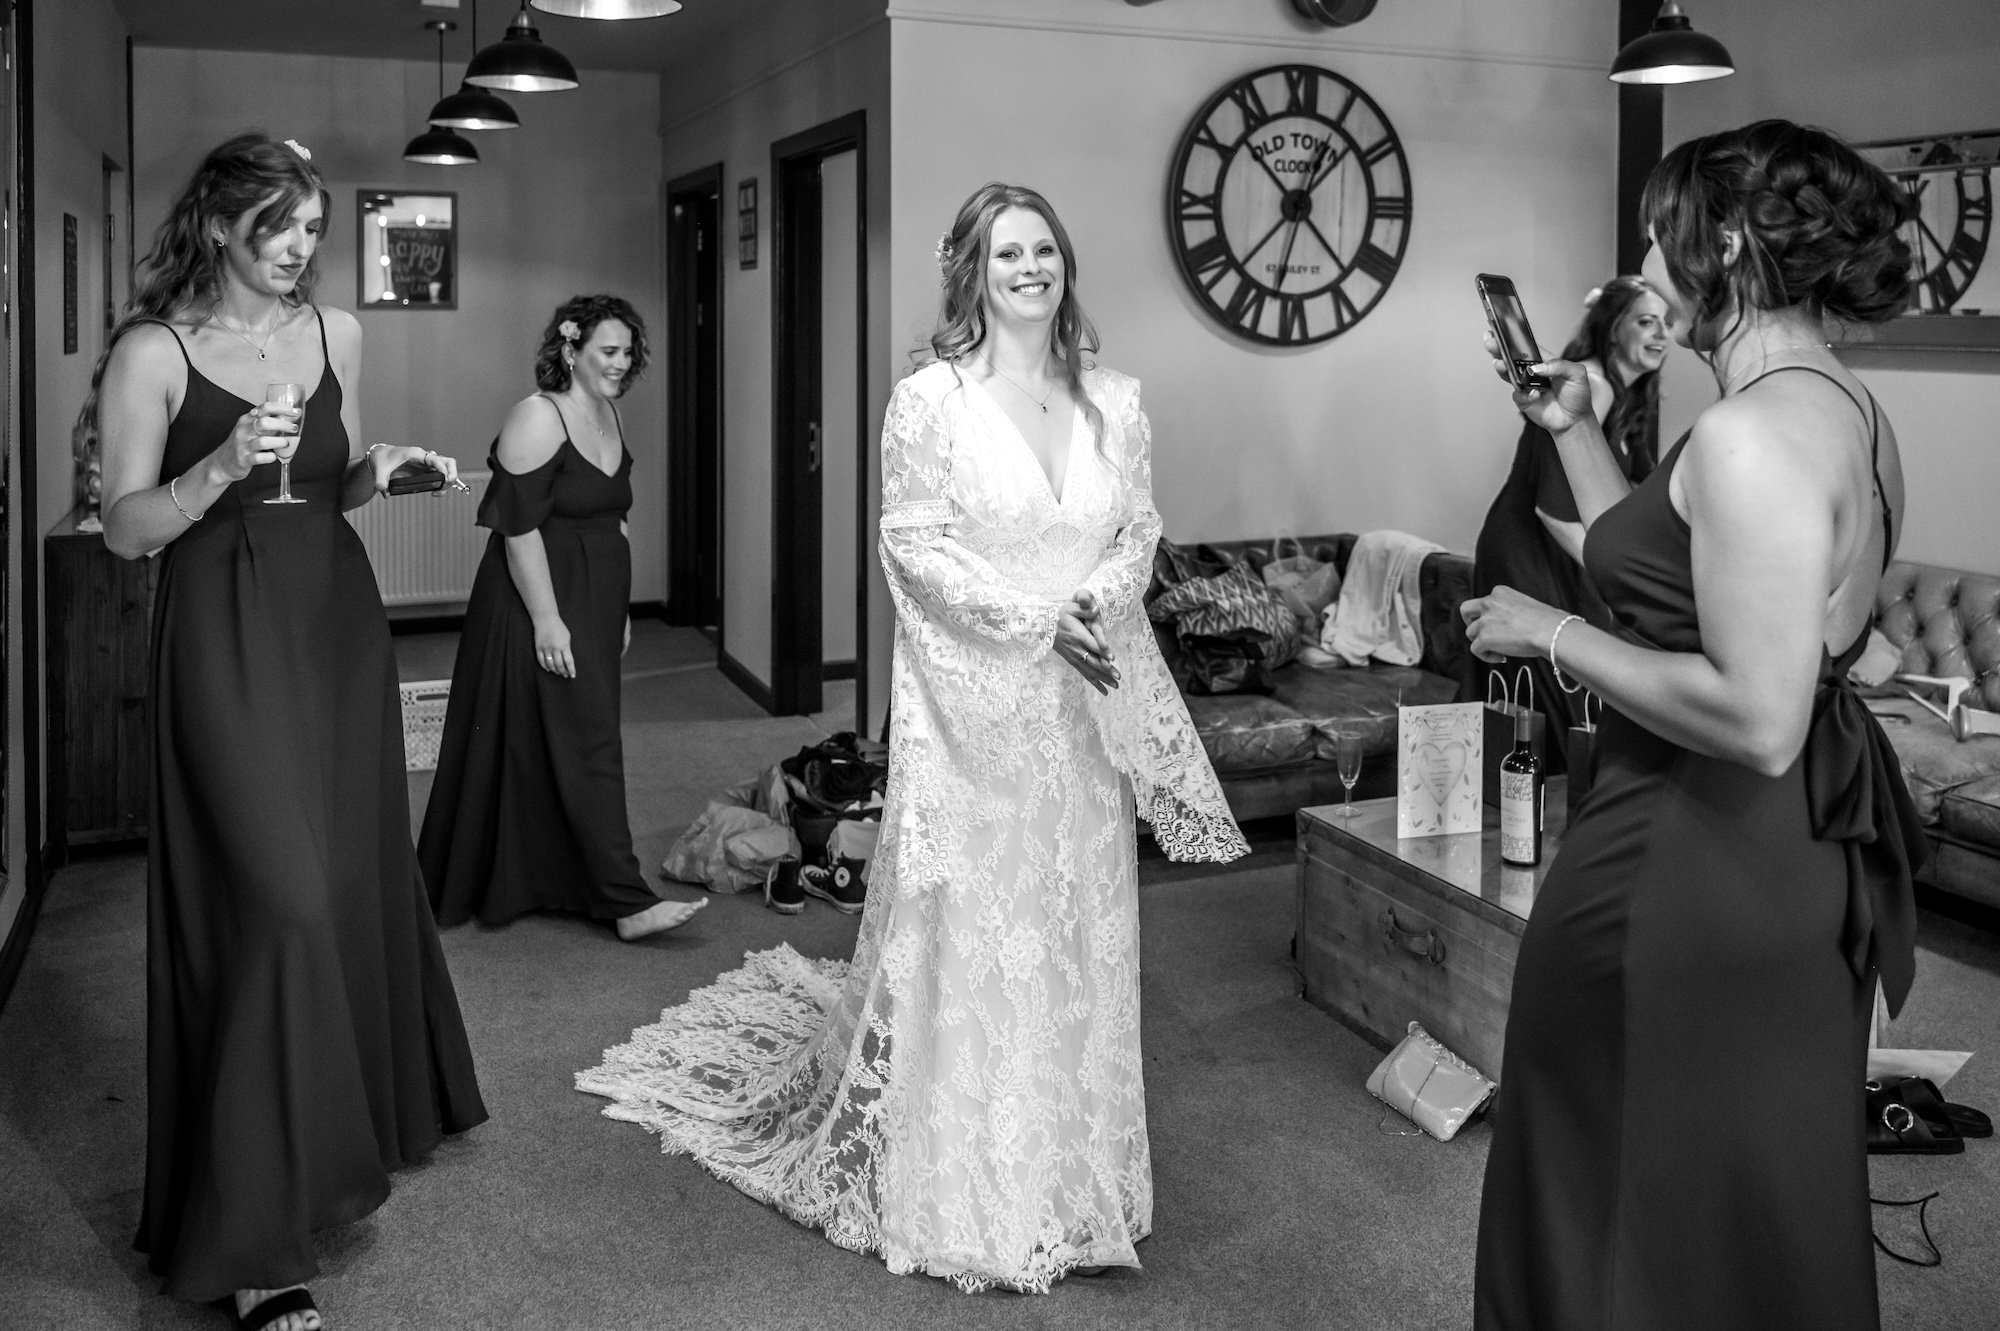 Rhian reveals her dress in the dressing room at The Mill Barns Wedding Venue